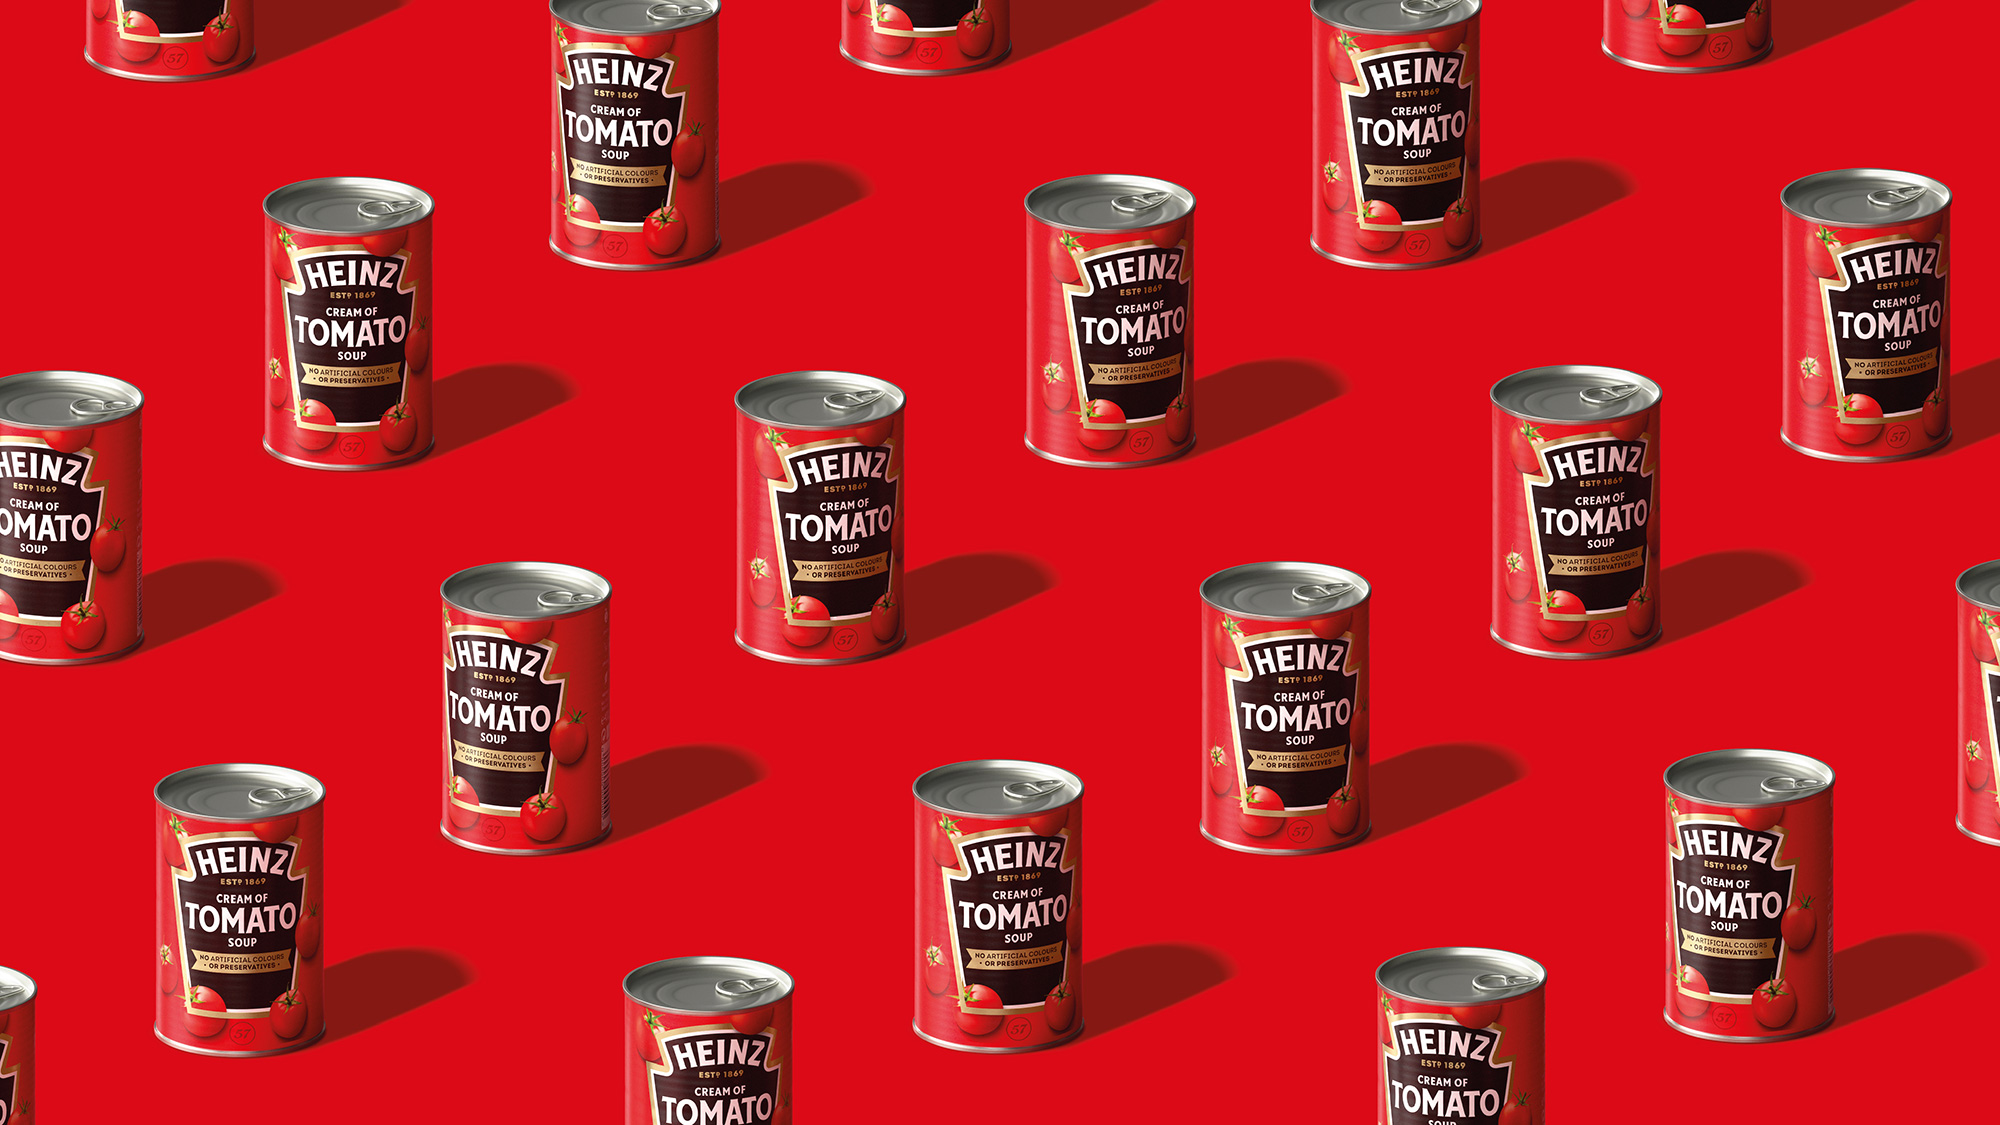 New Master Brand for Heinz by Jones Knowles Ritchie